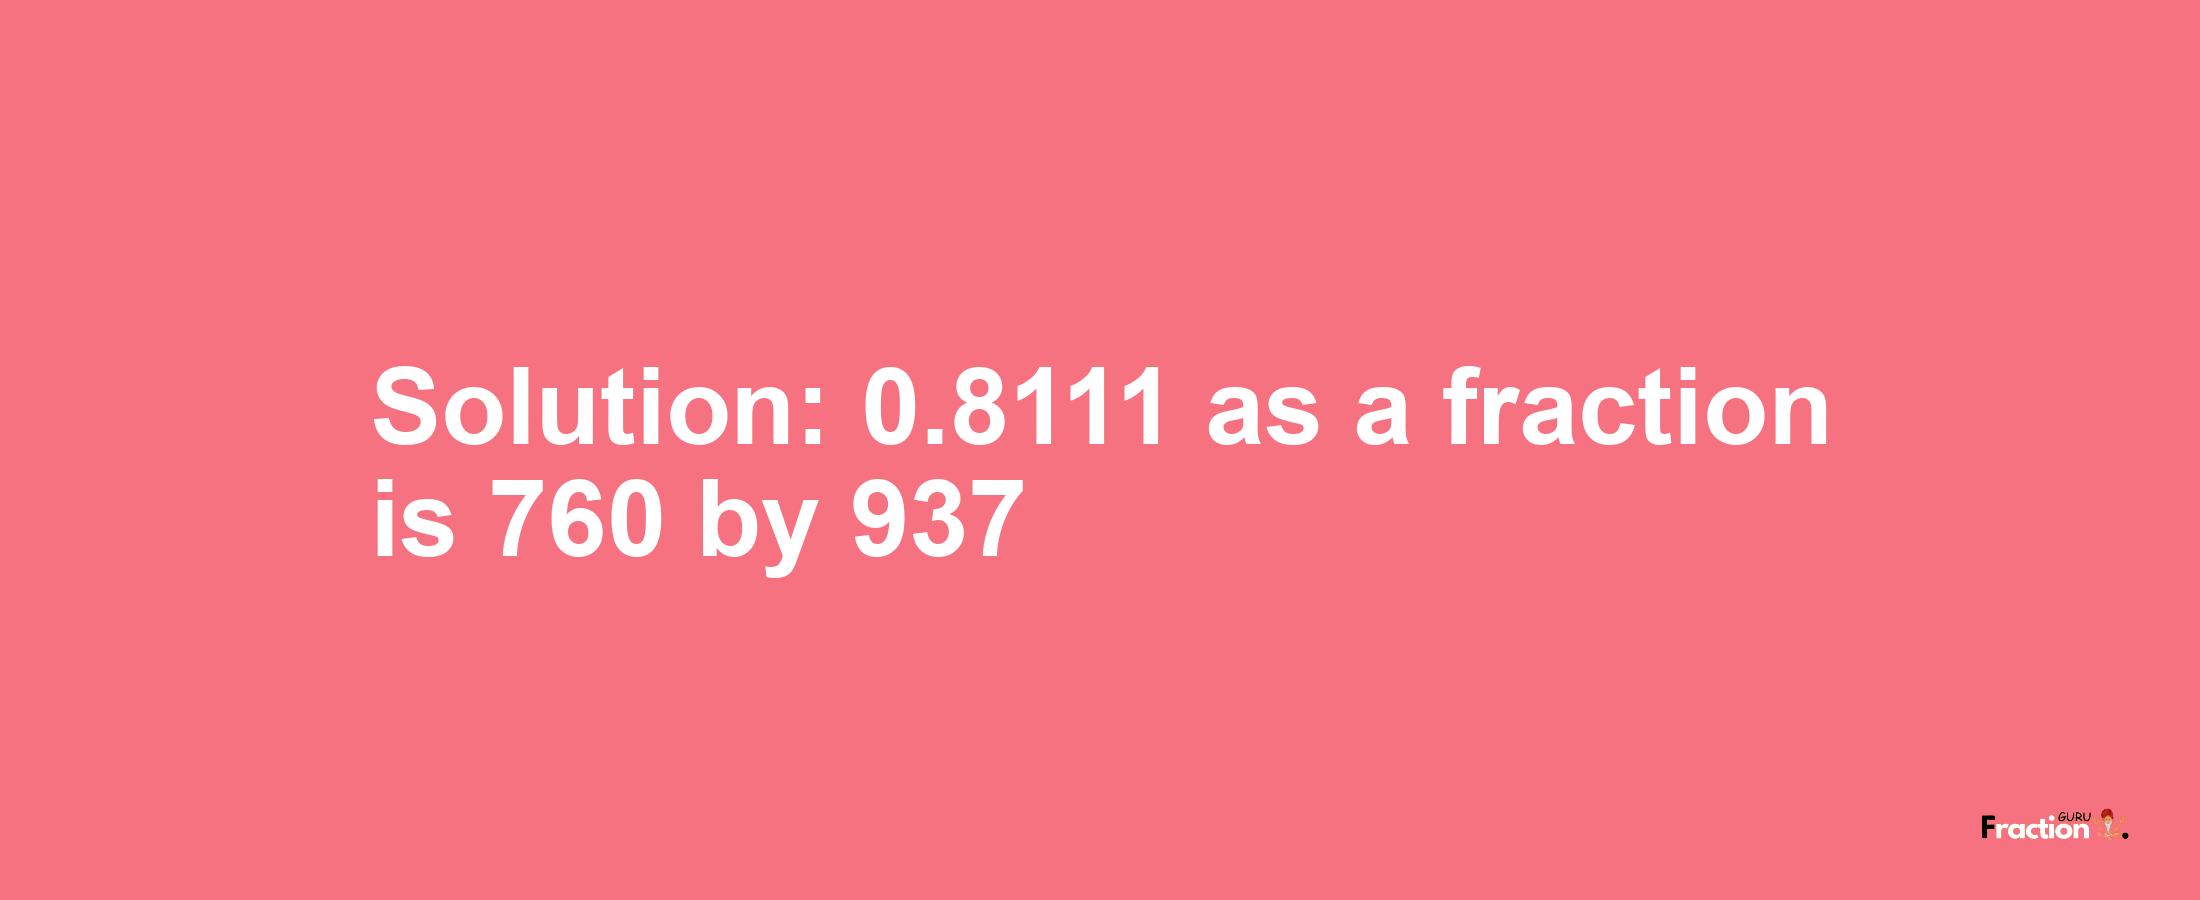 Solution:0.8111 as a fraction is 760/937